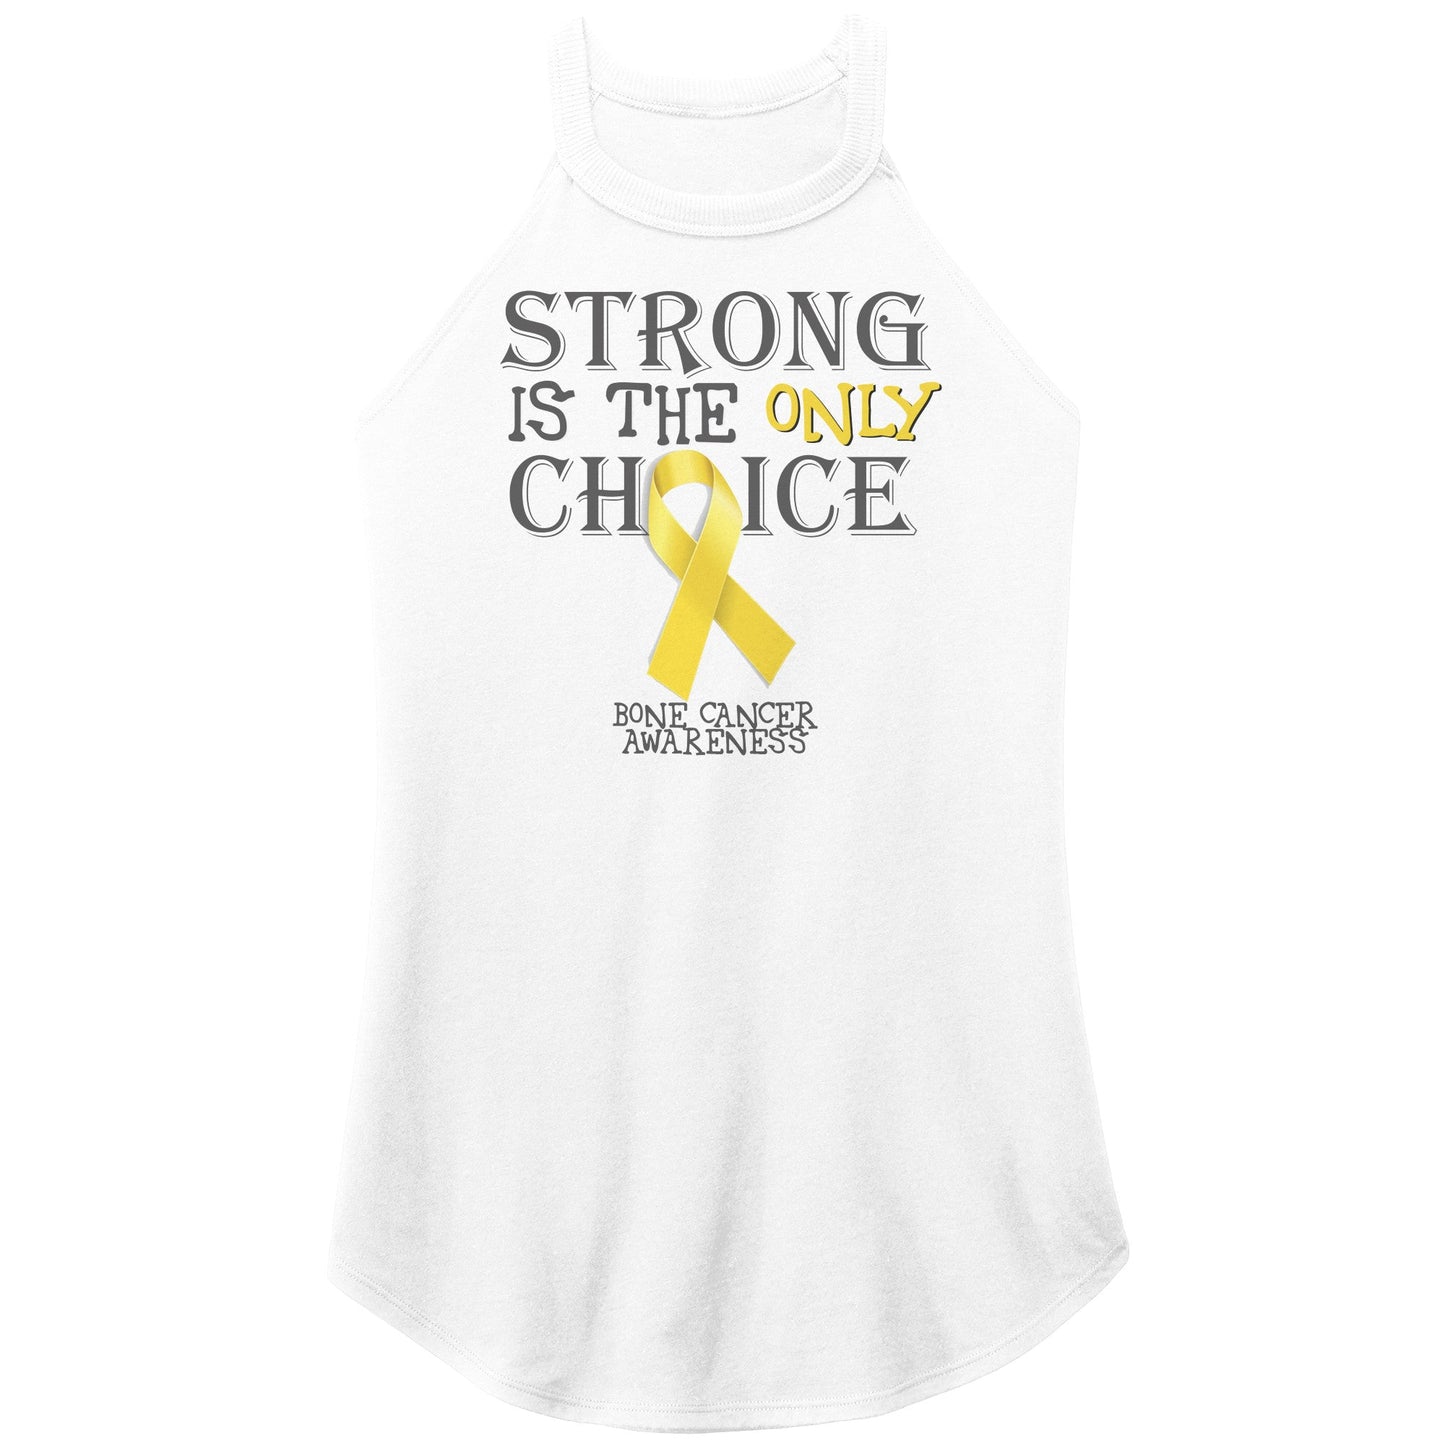 Strong is the Only Choice -Bone Cancer Awareness T-Shirt, Hoodie, Tank |x|